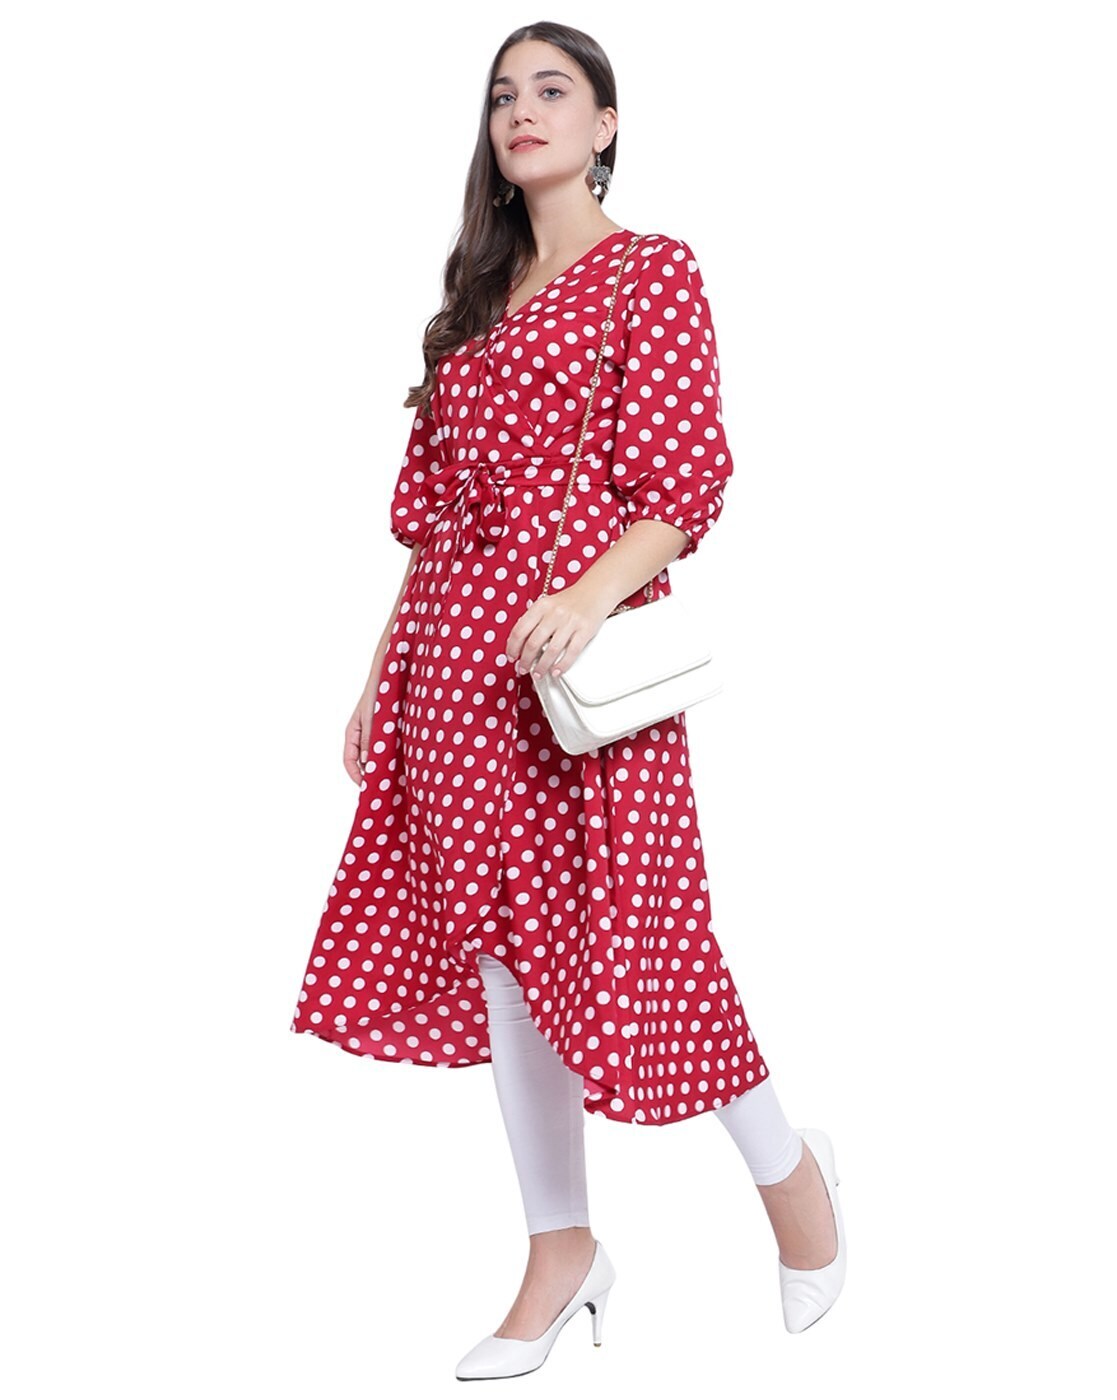 The Polka Dot Dress: Perfect Summer-to-Fall Transition - The Mom Edit